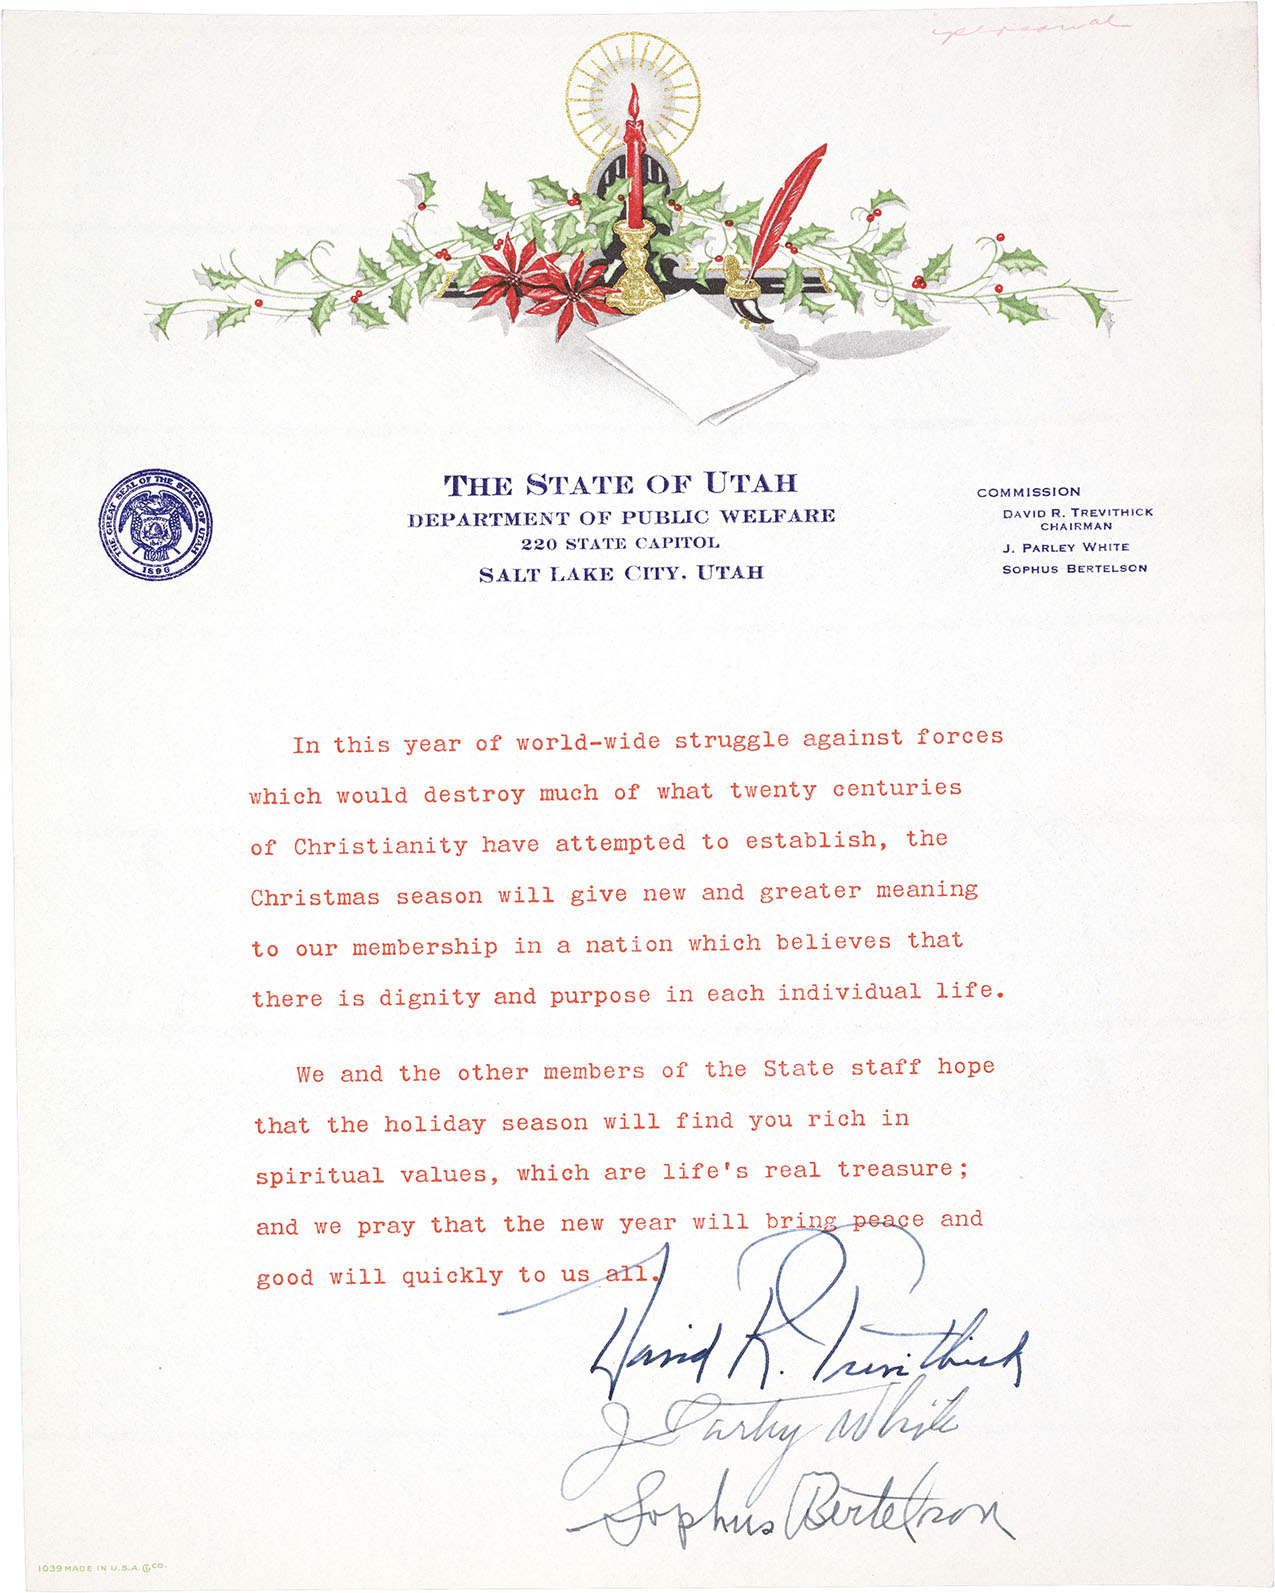 Happy Holidays from the Archives! - Utah State Archives and